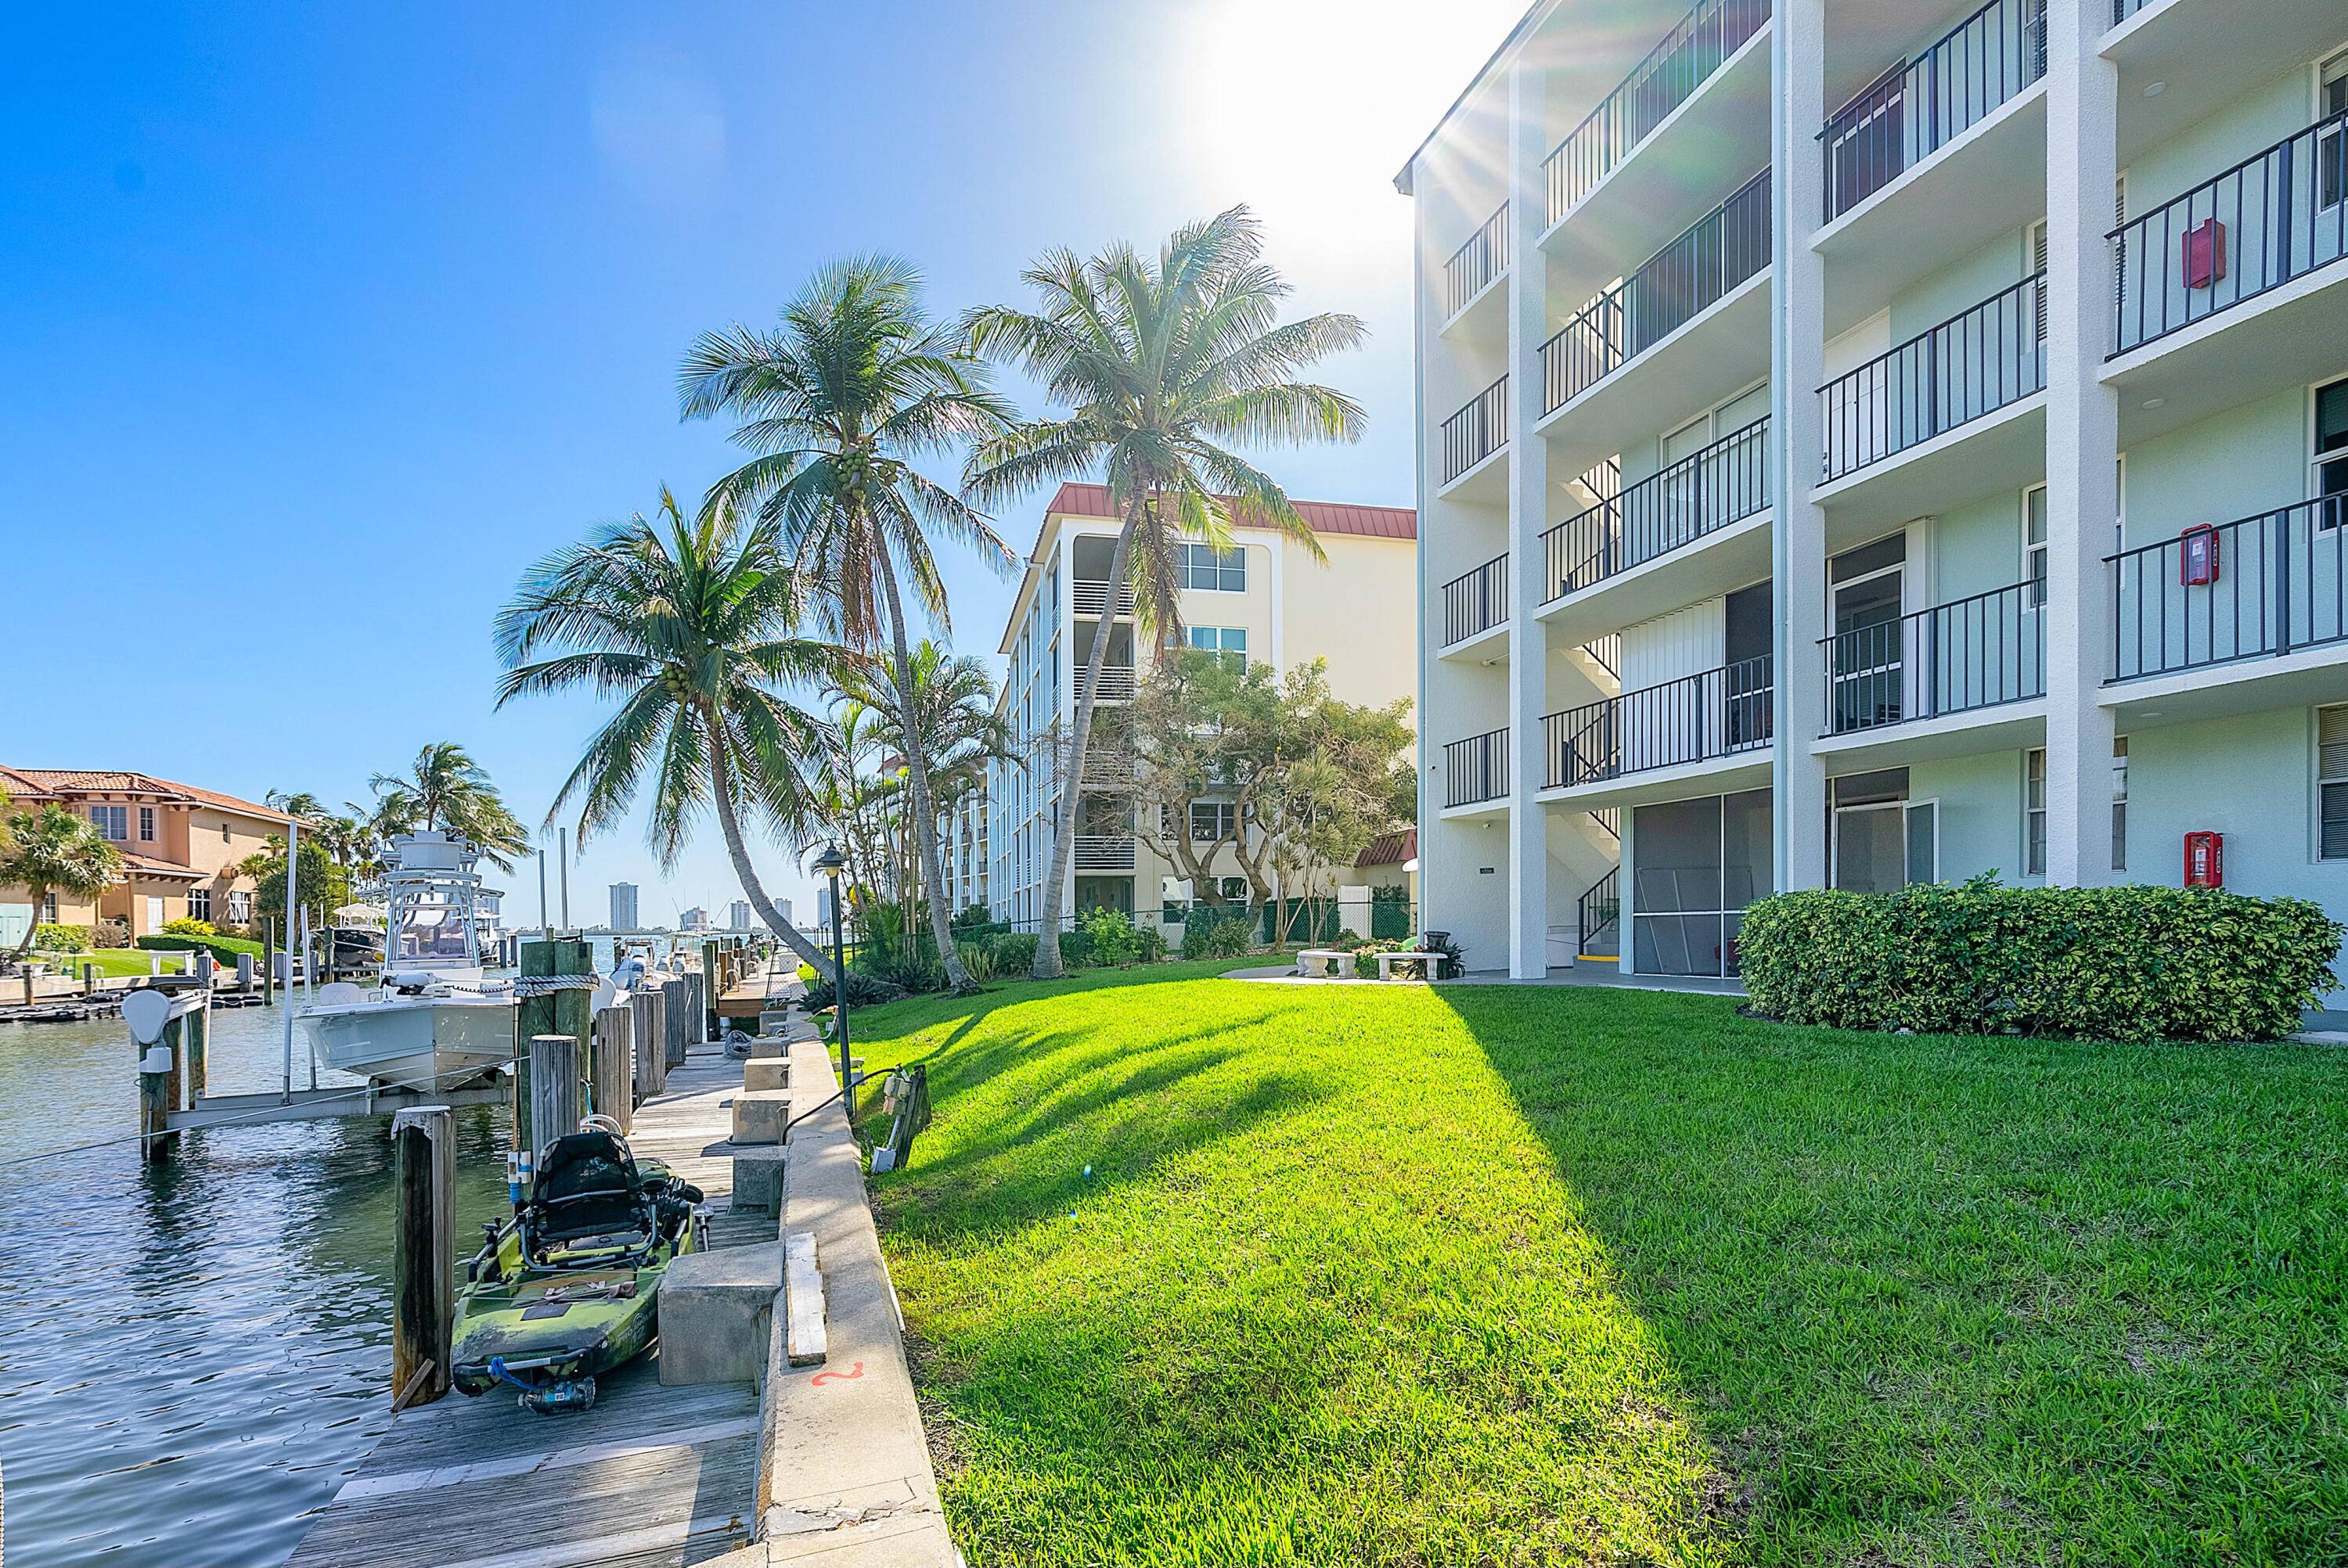 Nestled within a picturesque coastal community, this 2 bedroom, 2 bathroom condo presents an idyllic retreat with a 40' boat slip allowing up to a 36' boat, conveniently located right ...